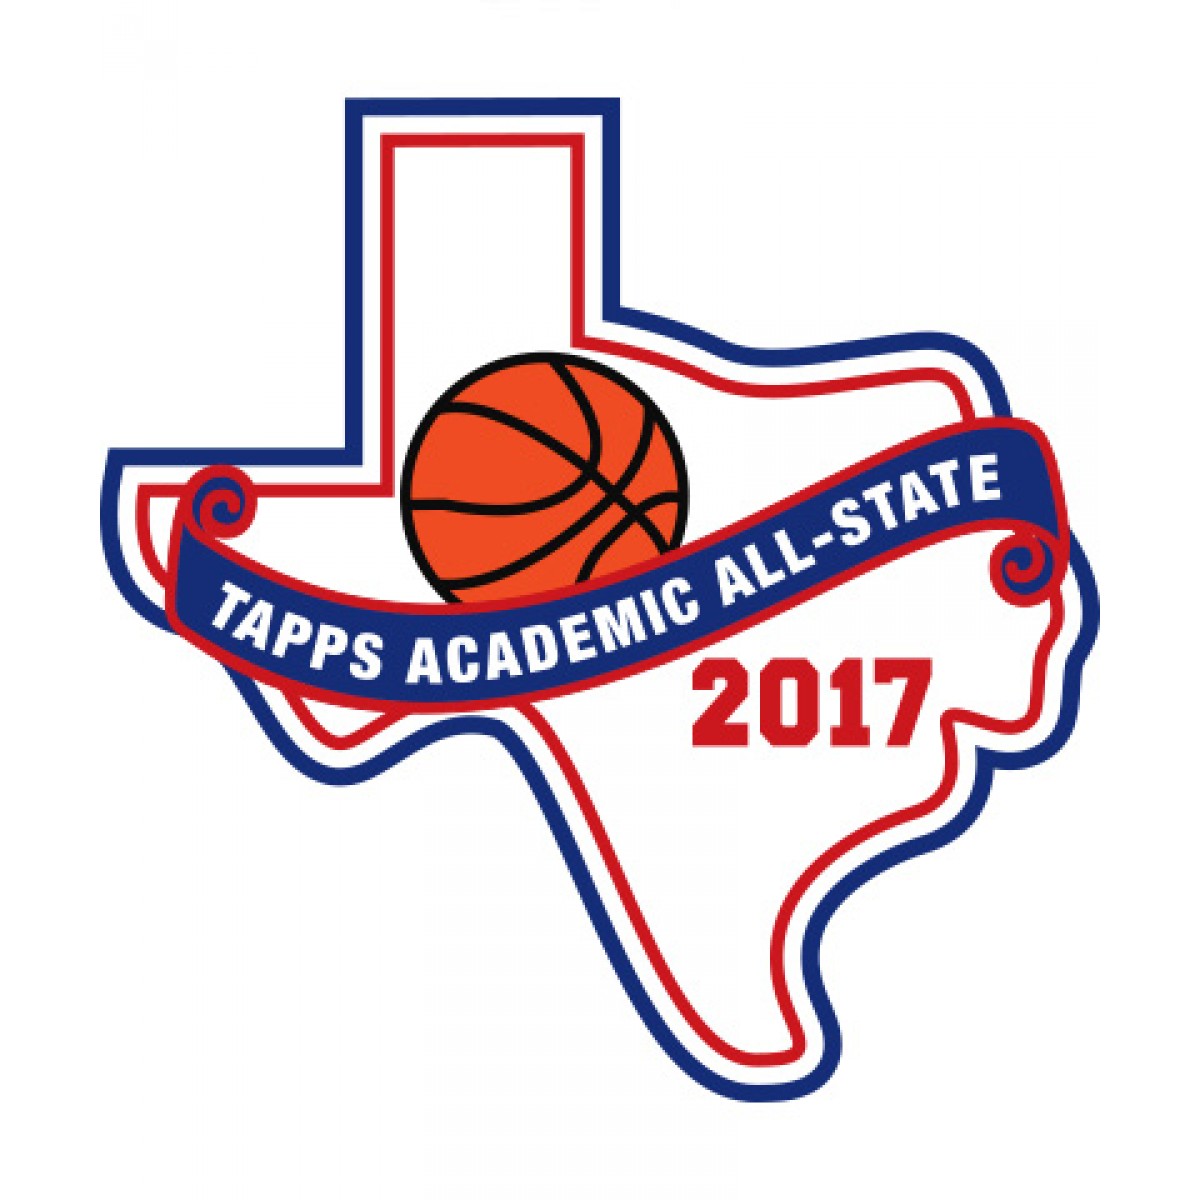 Felt 2017 TAPPS Academic All-State Basketball Patch